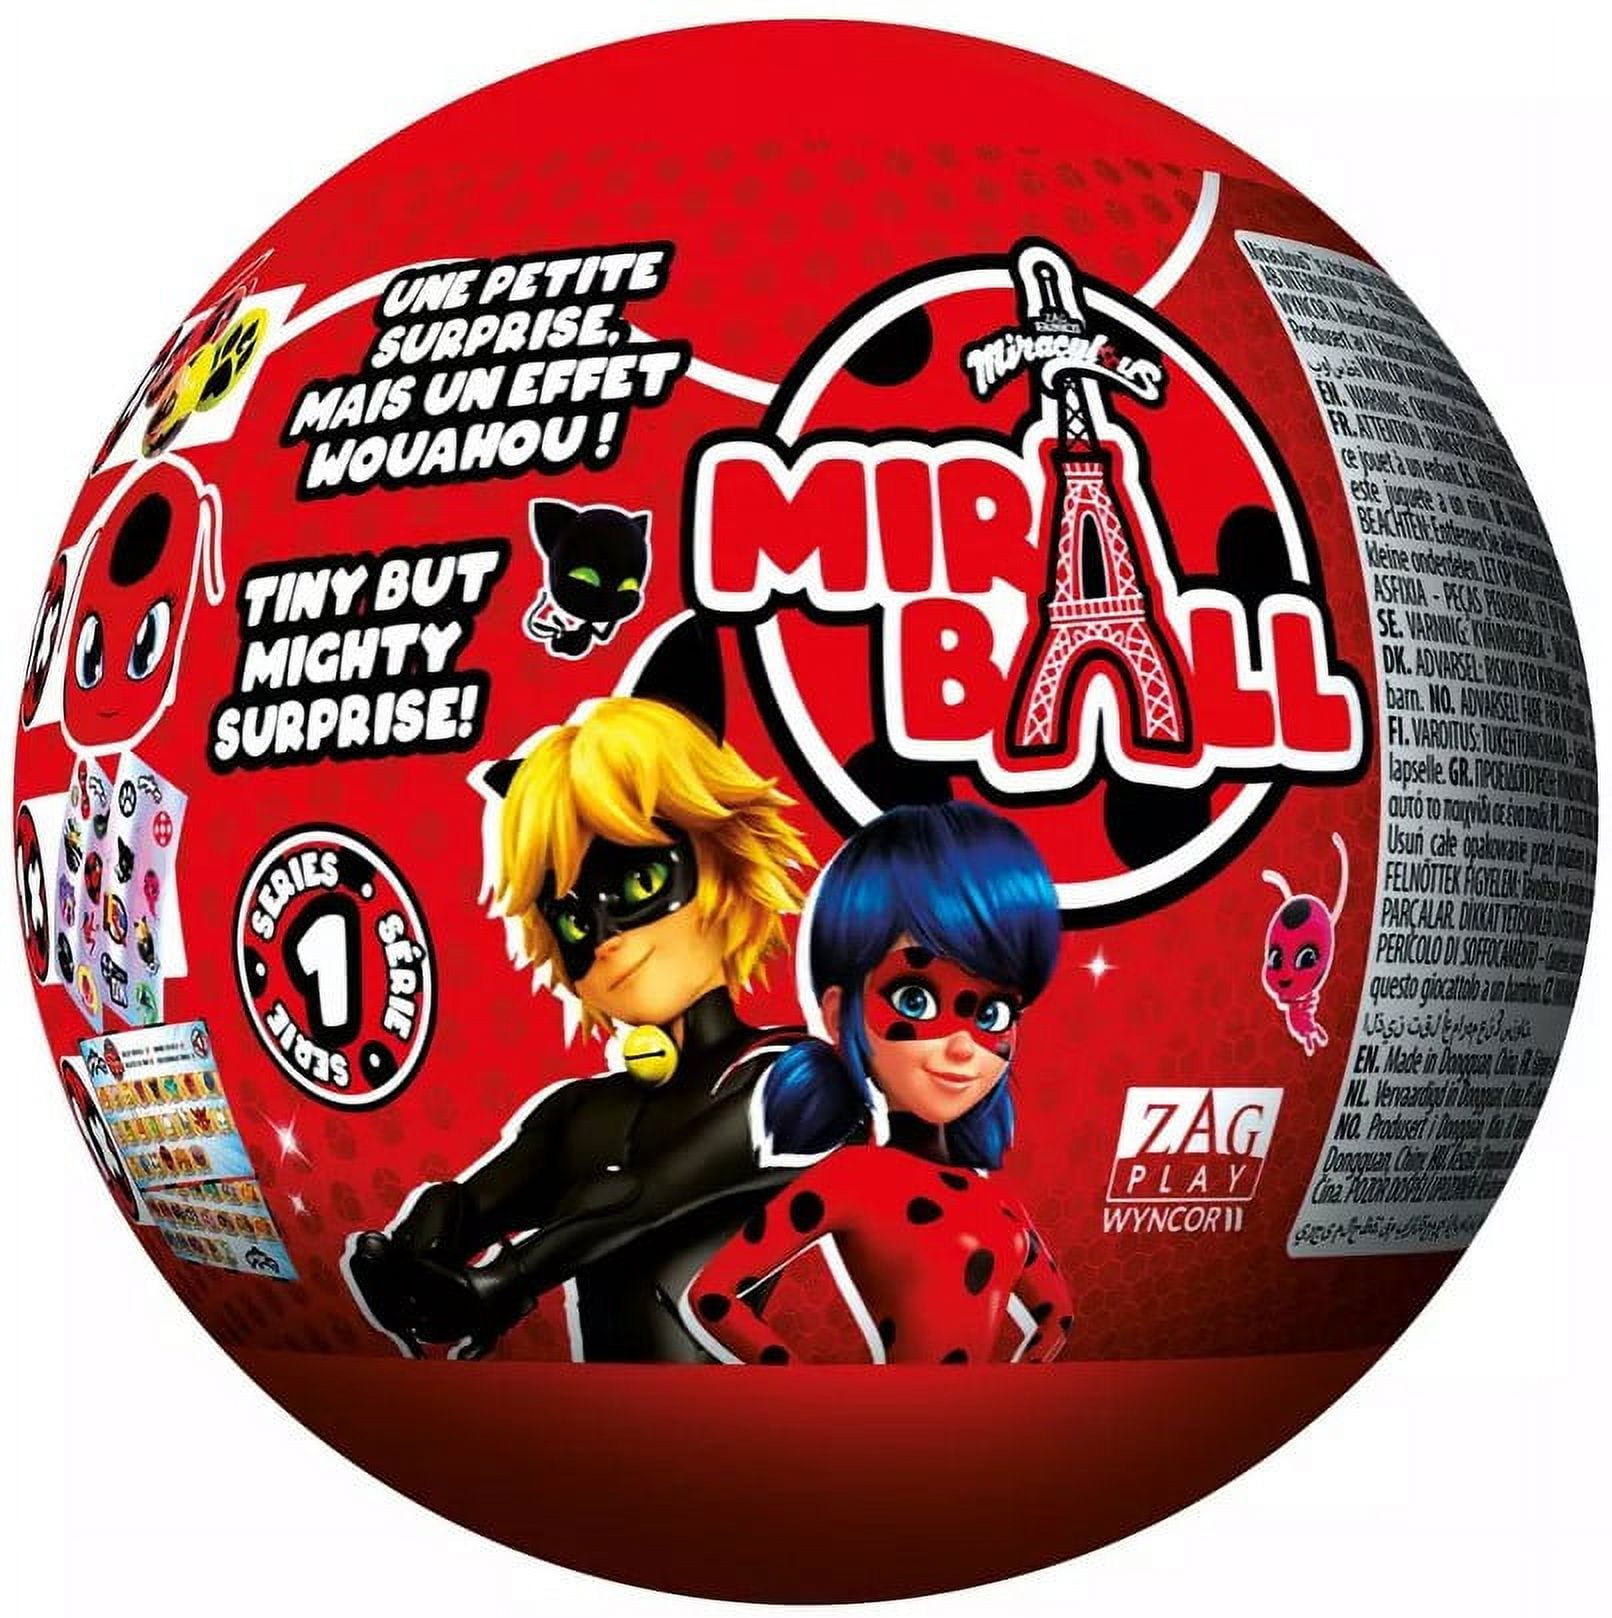 Miraculous Ladybug, 4-1 Surprise Miraball, Toys for Kids with Collectible Character Metal Ball, Kwami Plush, Glittery Stickers and White Ribbon